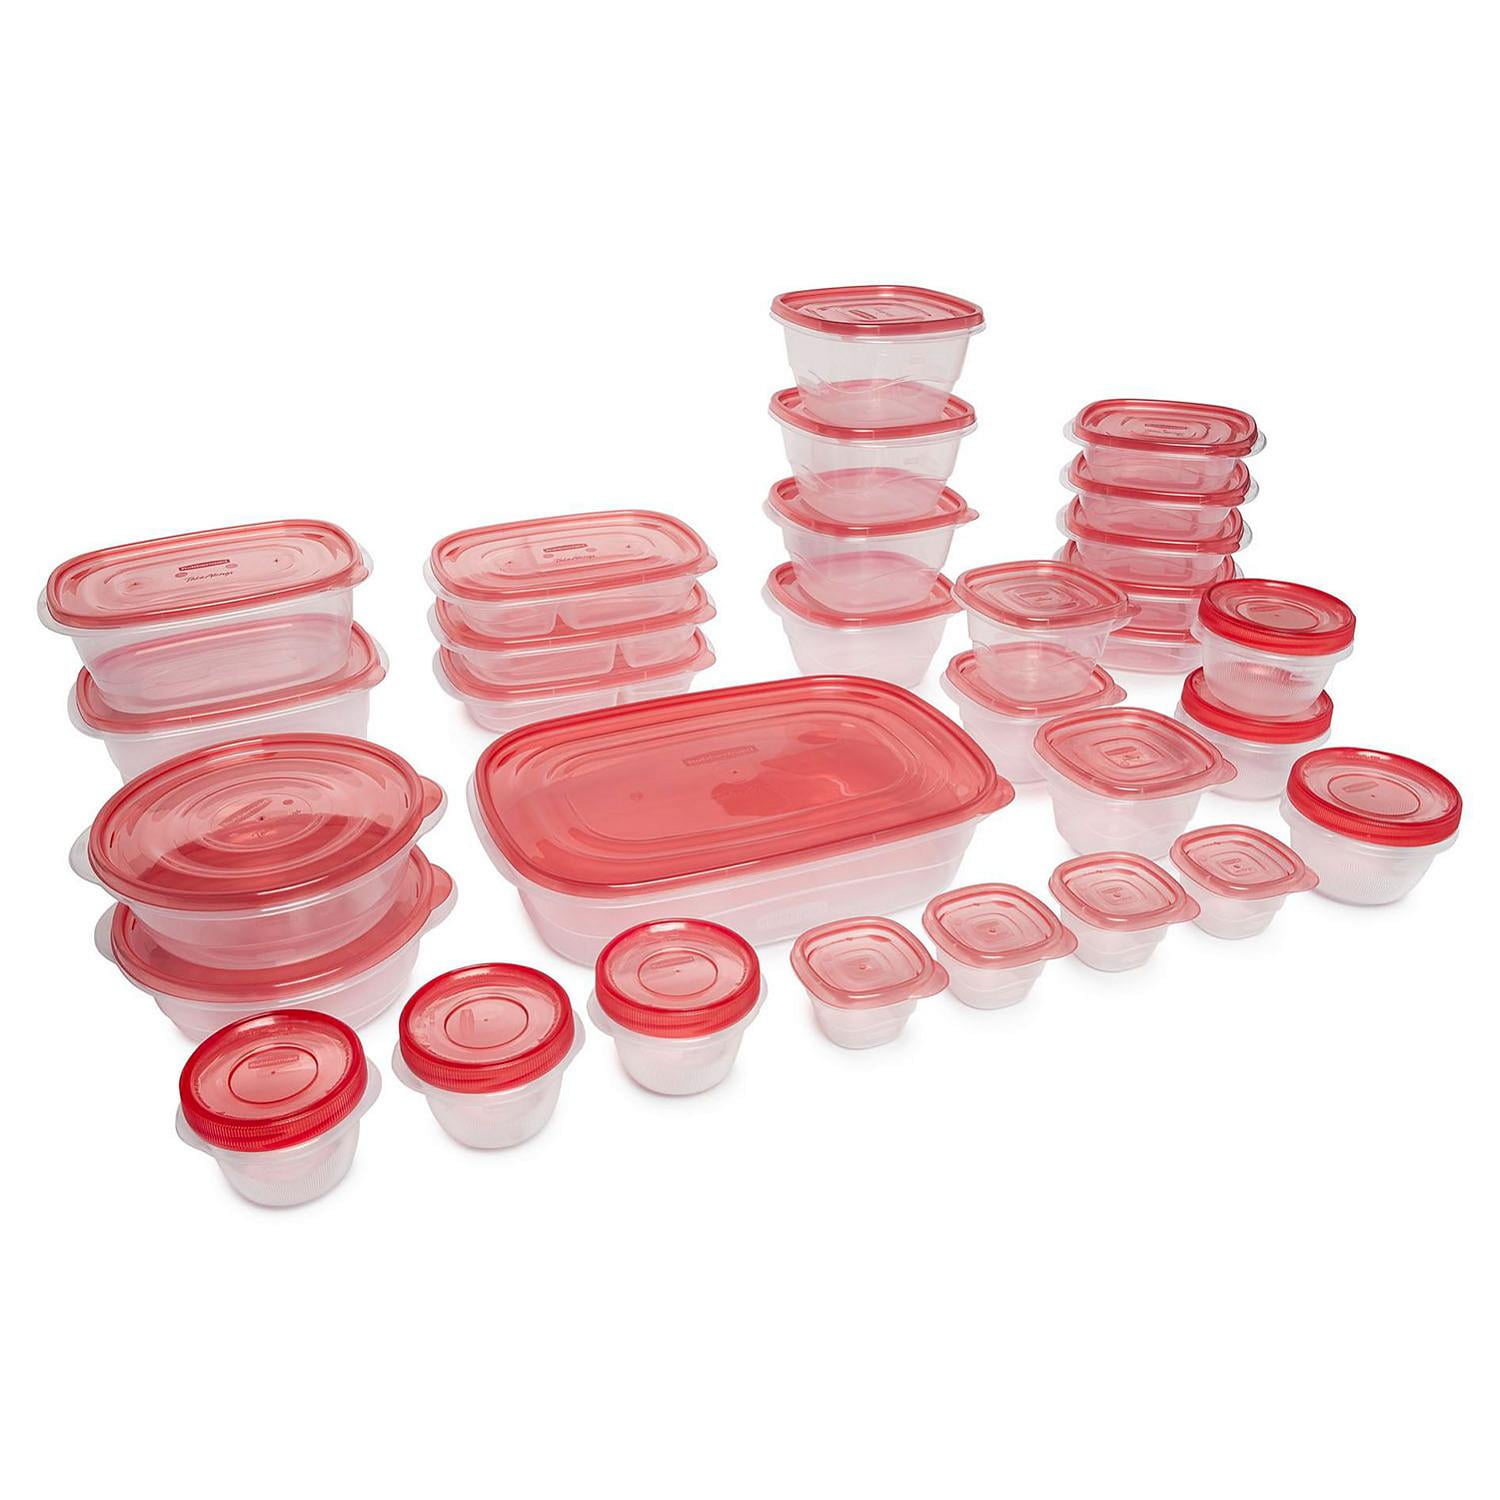 Rubbermaid TakeAlongs Containter Variety Pack with Lids - 62 Pieces -  HapyDeals